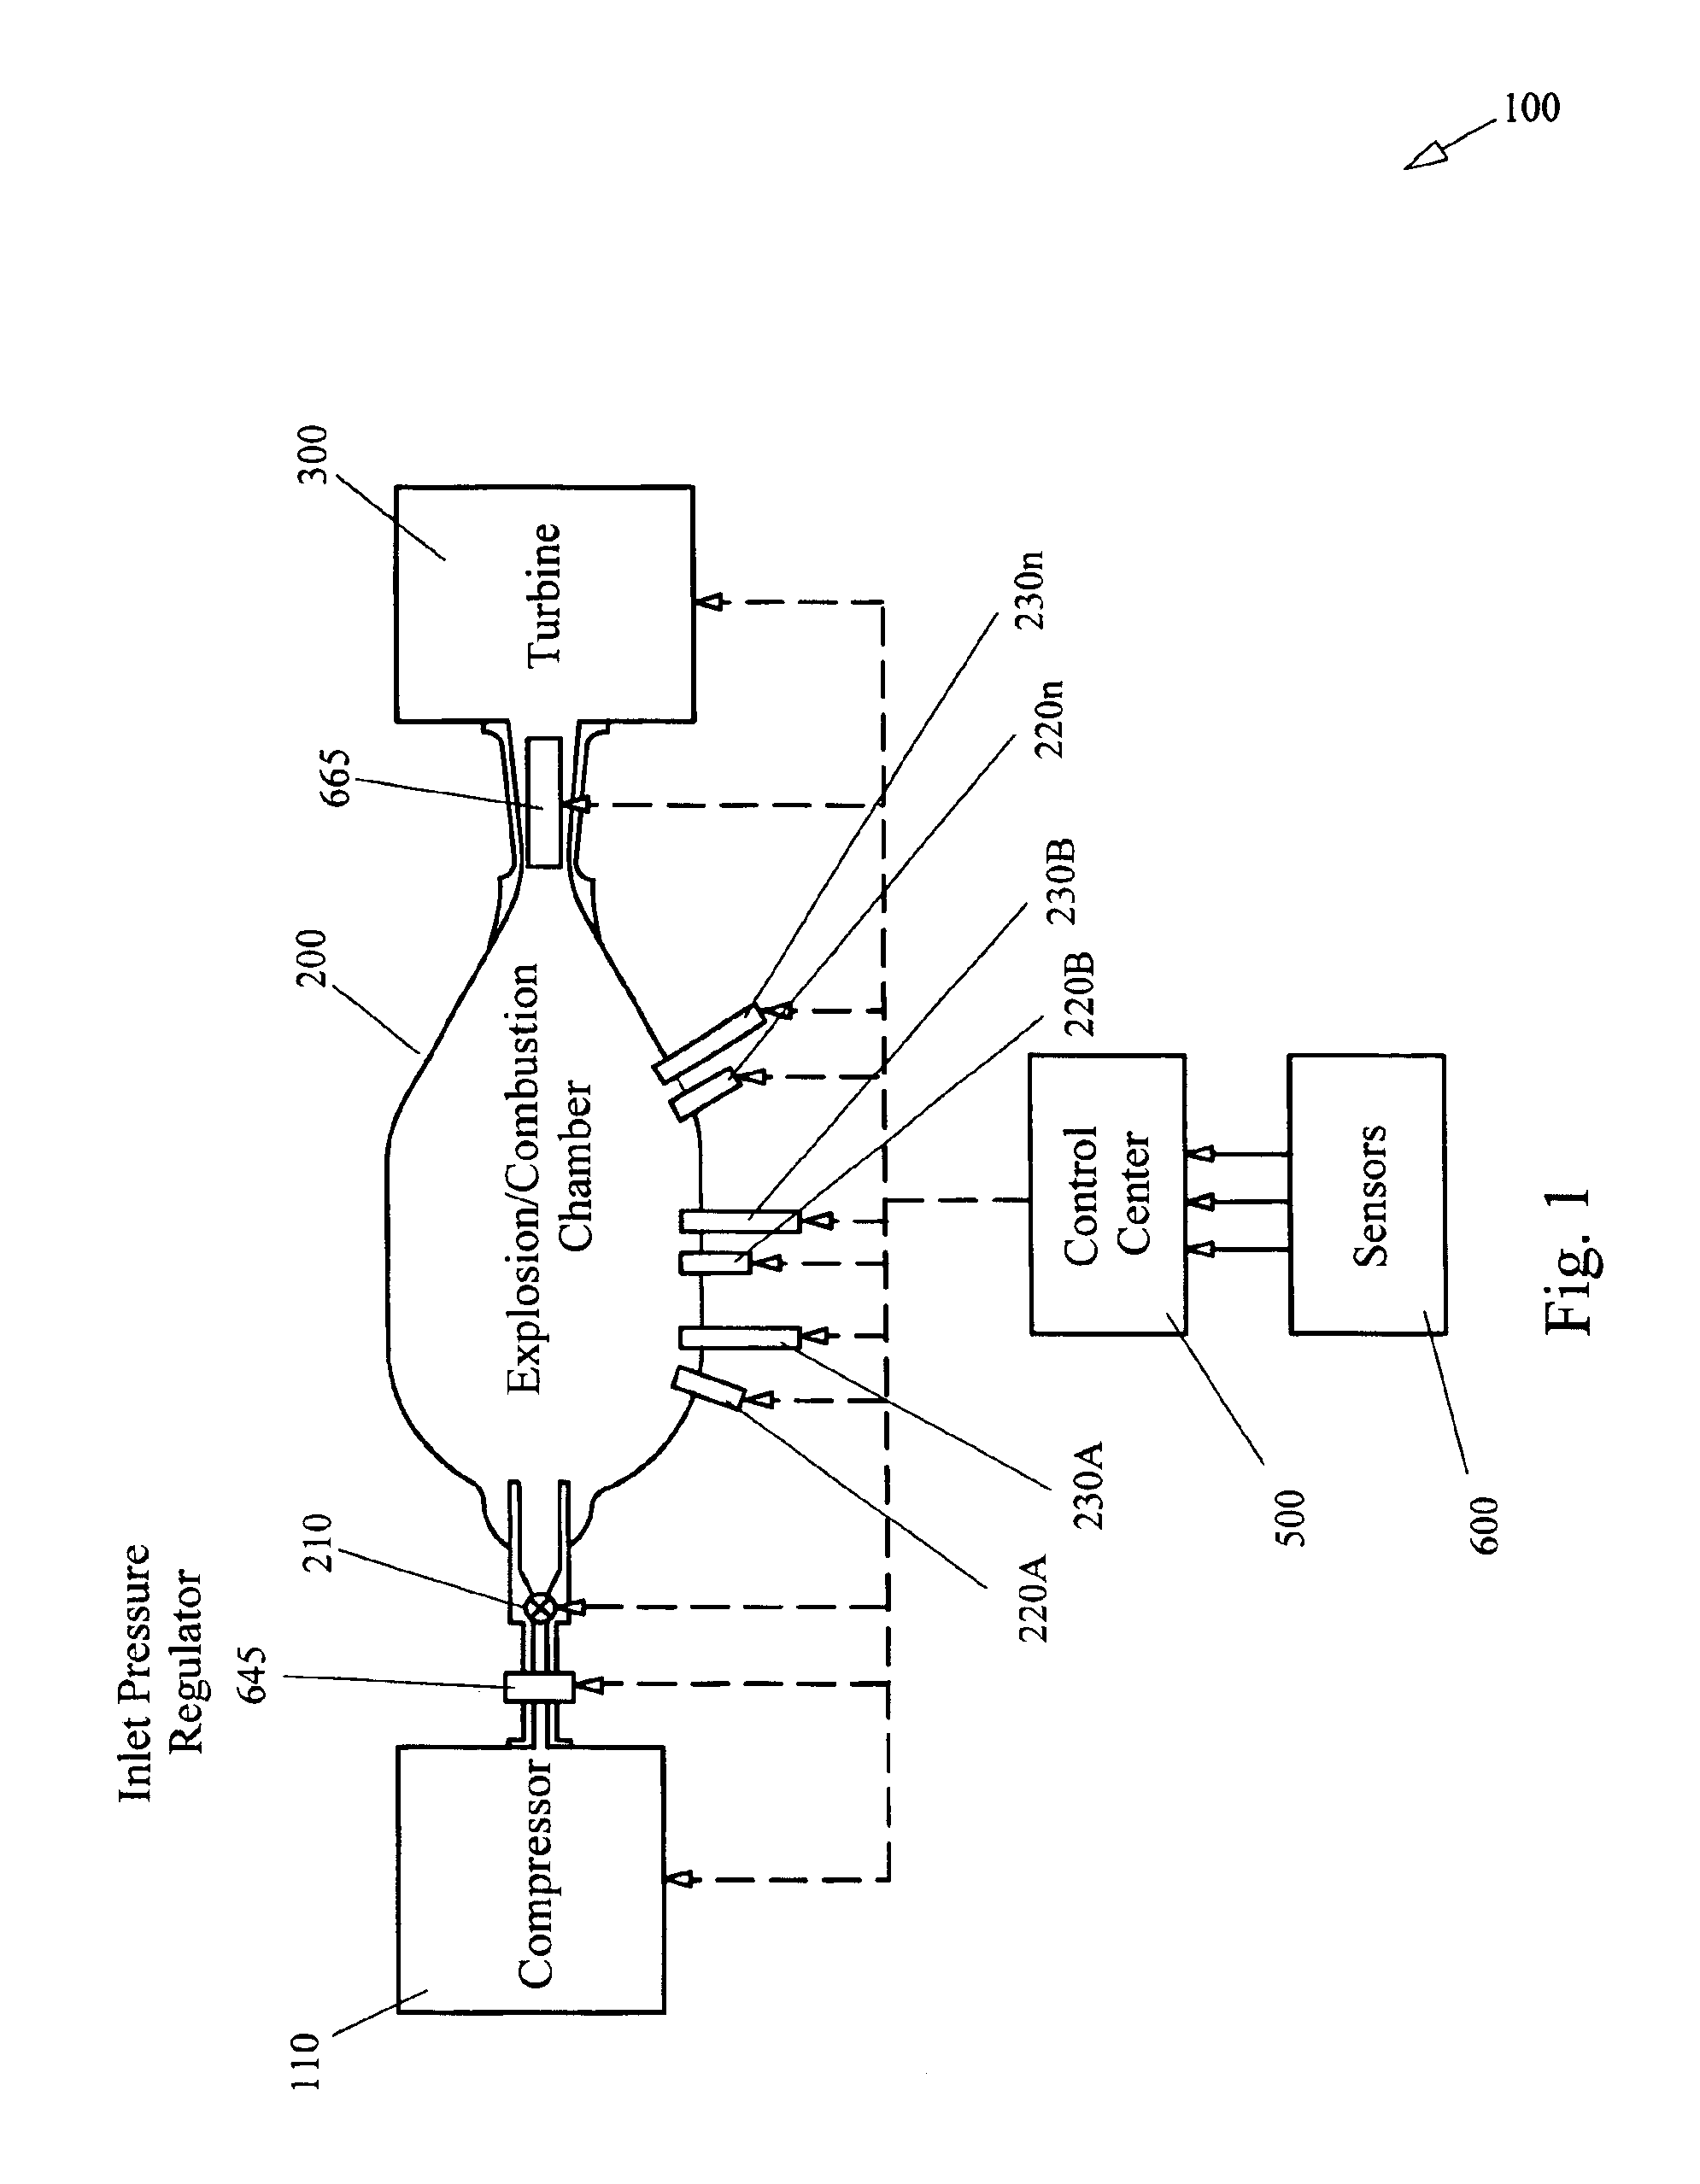 High efficiency low hydrocarbon emmisson hybrid power plant using operational aspects of both internal combustion and jet engines